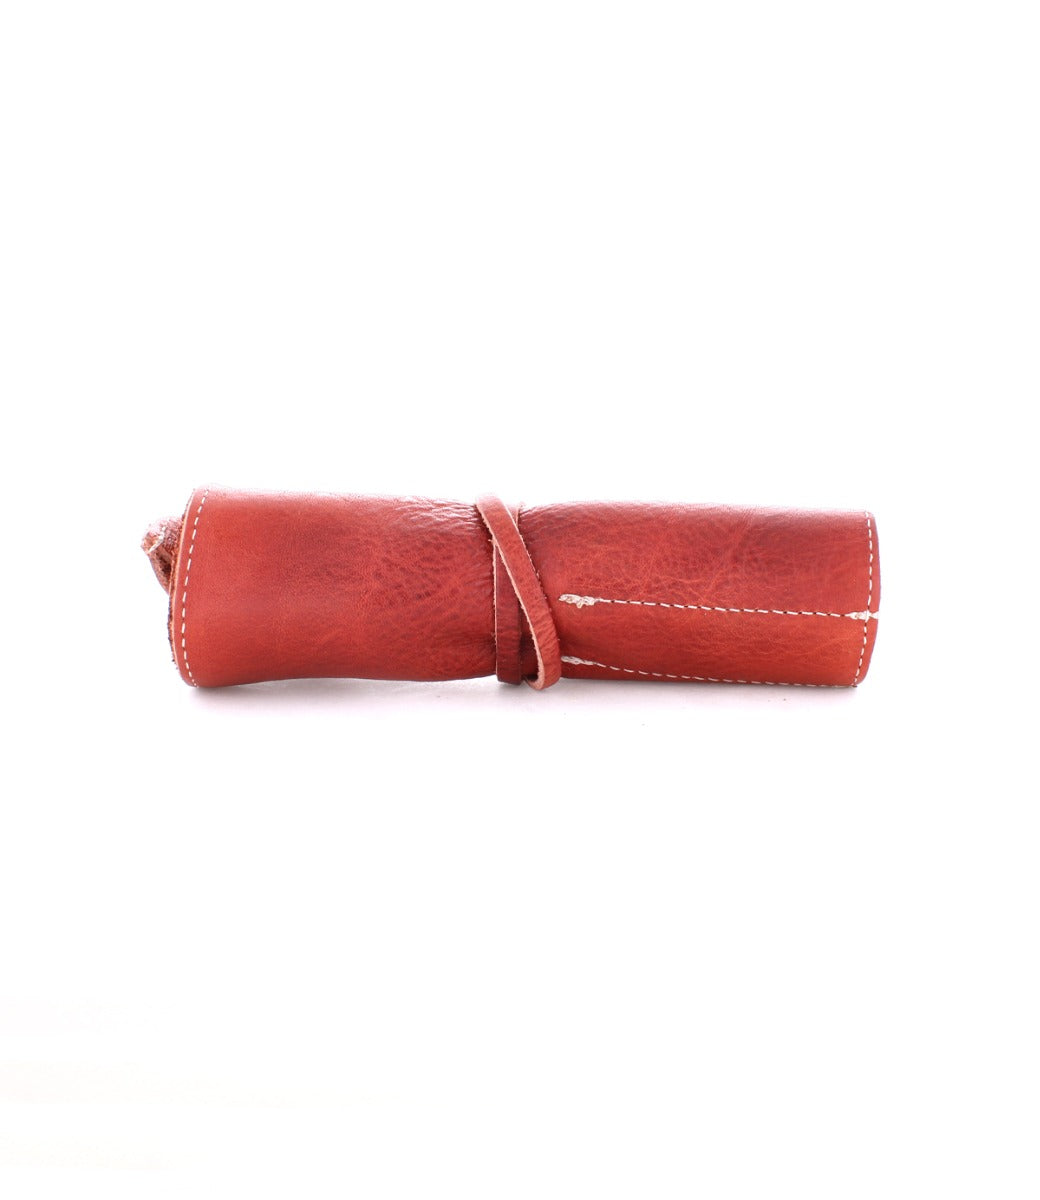 A Prepped by Bed Stu red leather pencil case on a white background.